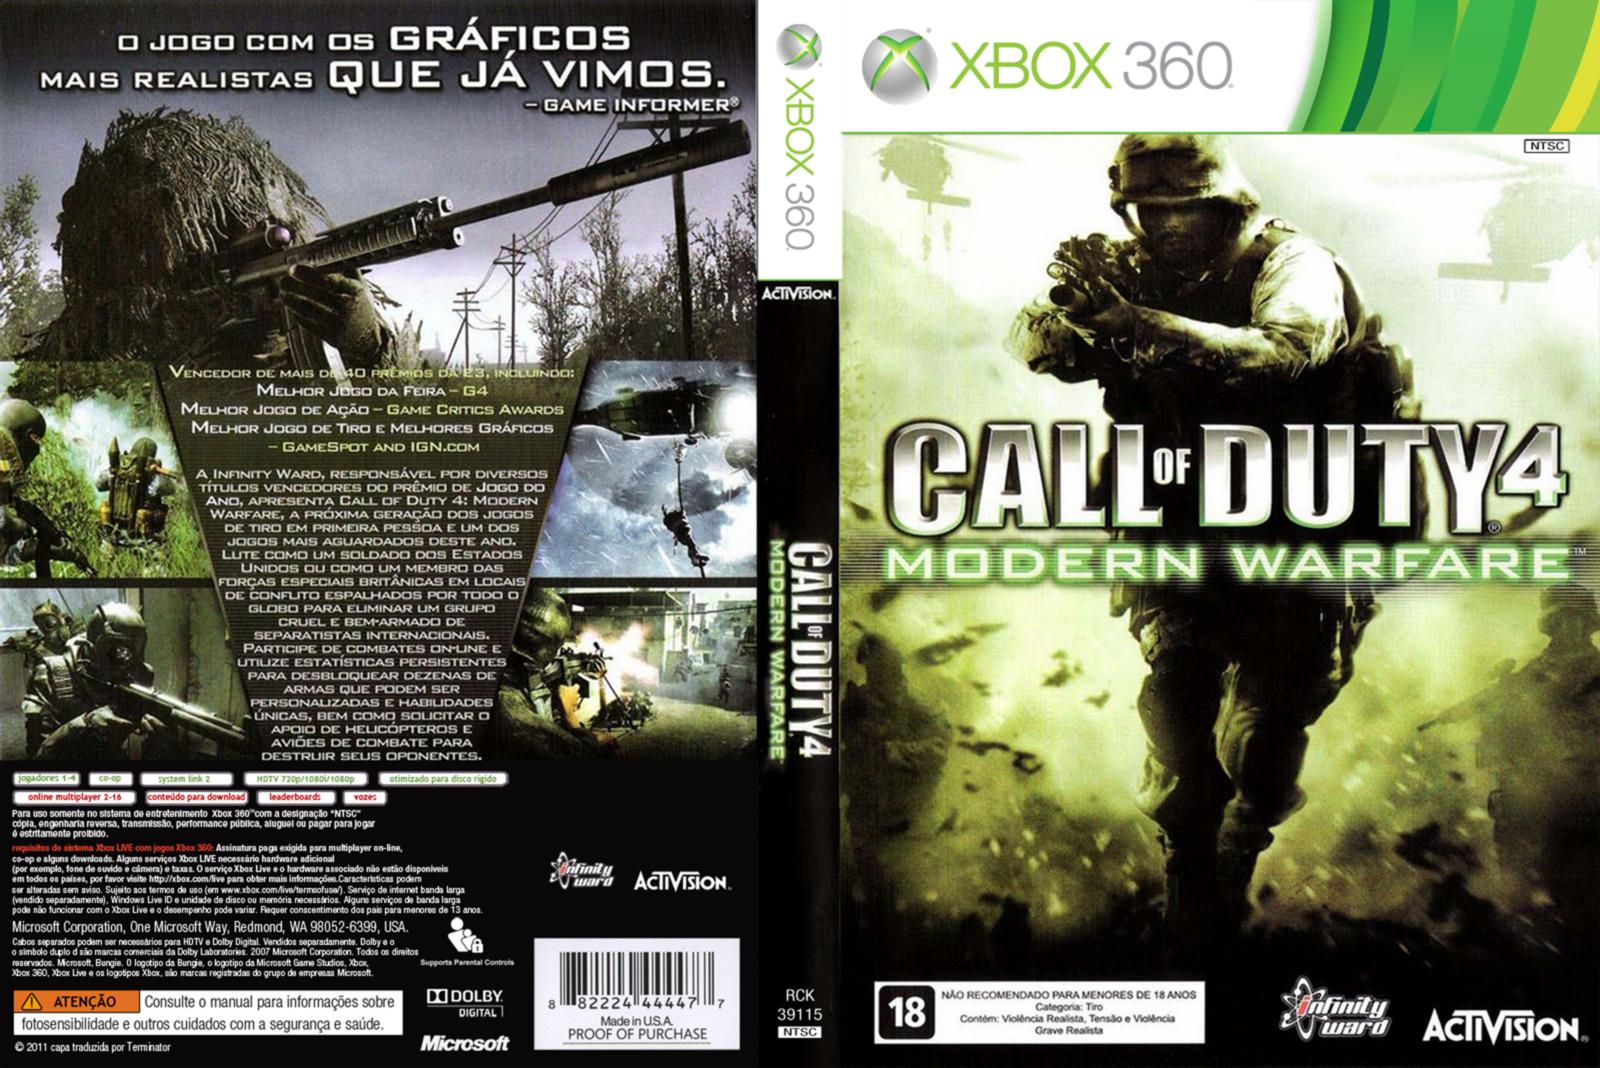 Call of duty xbox game. Call of Duty mw2 Xbox 360 диск. Call of Duty Warfare 2 Xbox 360. Call of Duty Modern Warfare Xbox 360. Modern Warfare 2 Xbox 360 обложка.